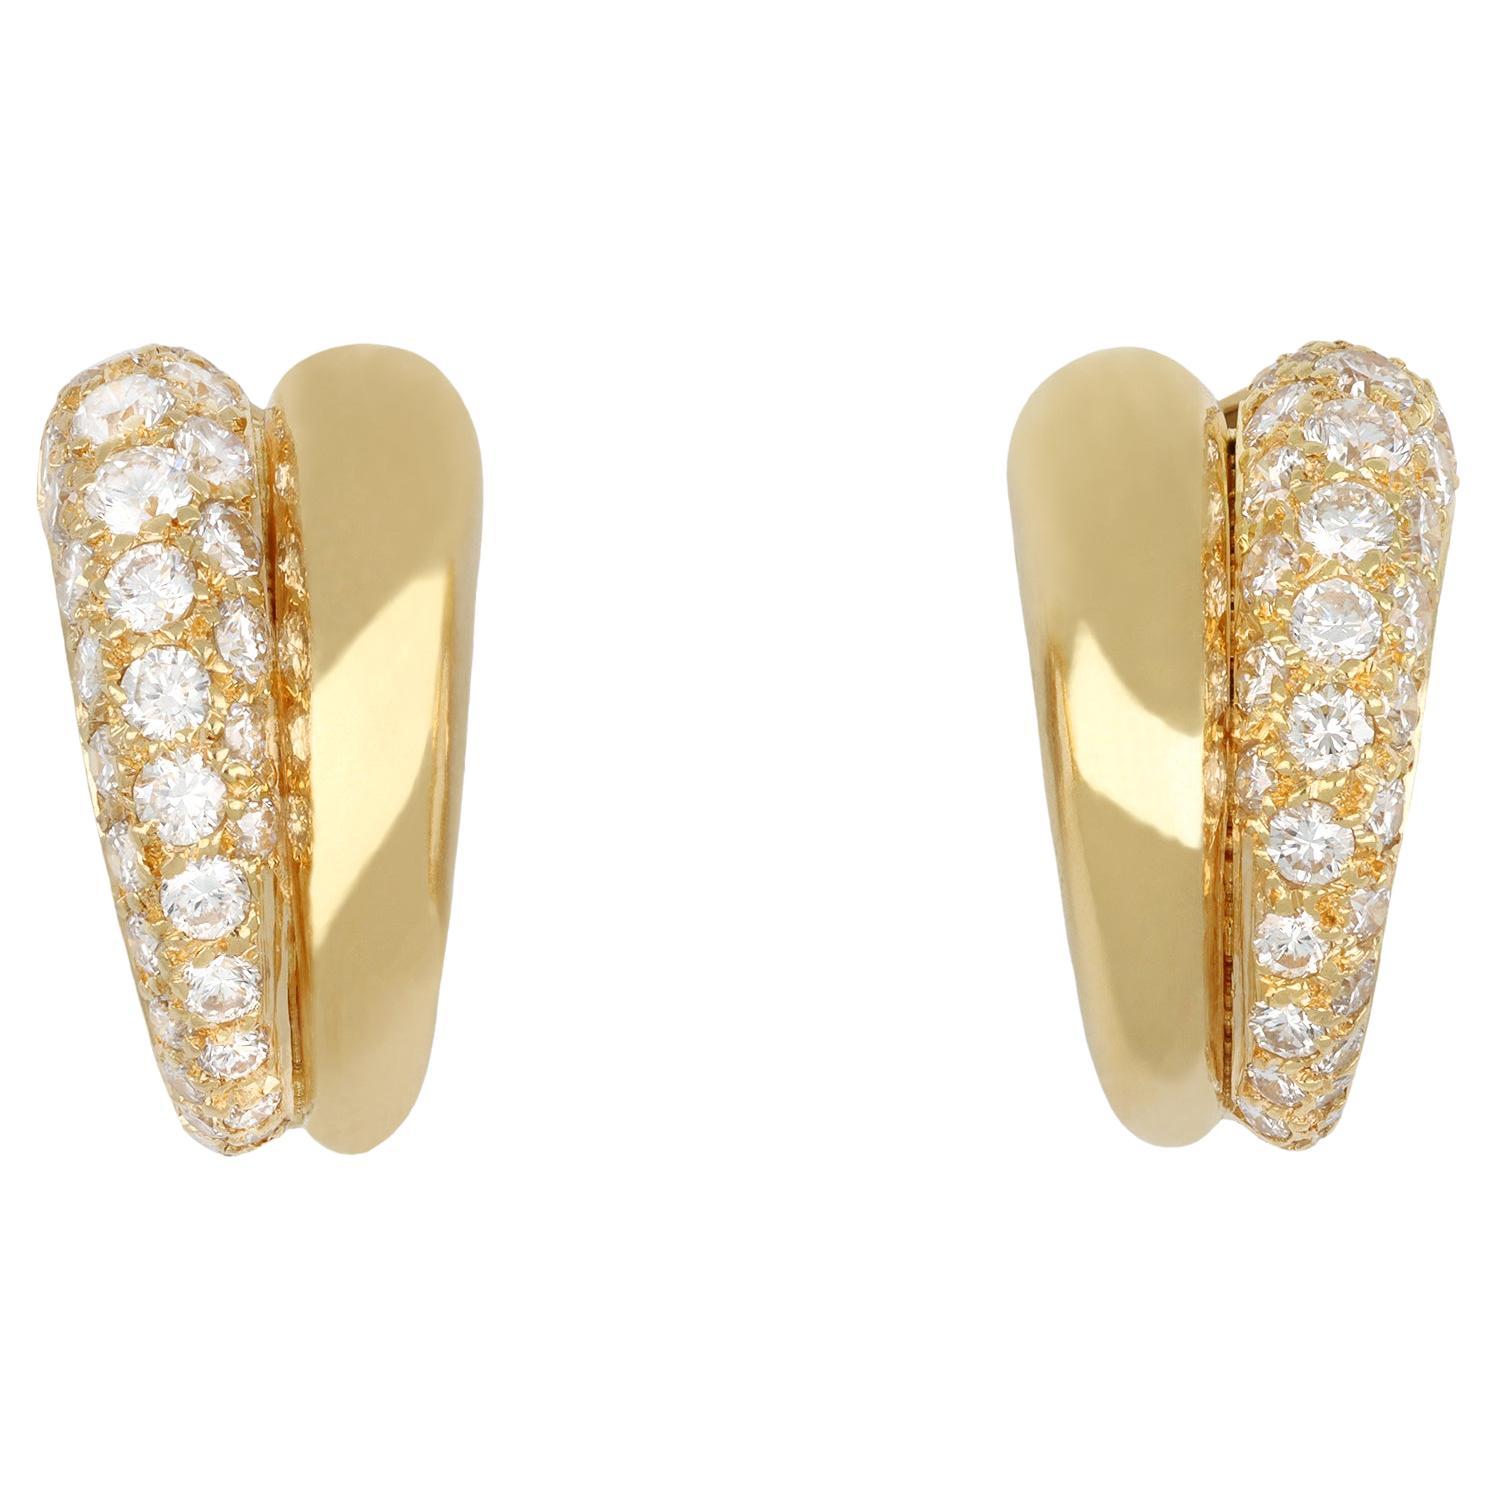 Cartier diamond hoop earrings, French, circa 1960. For Sale